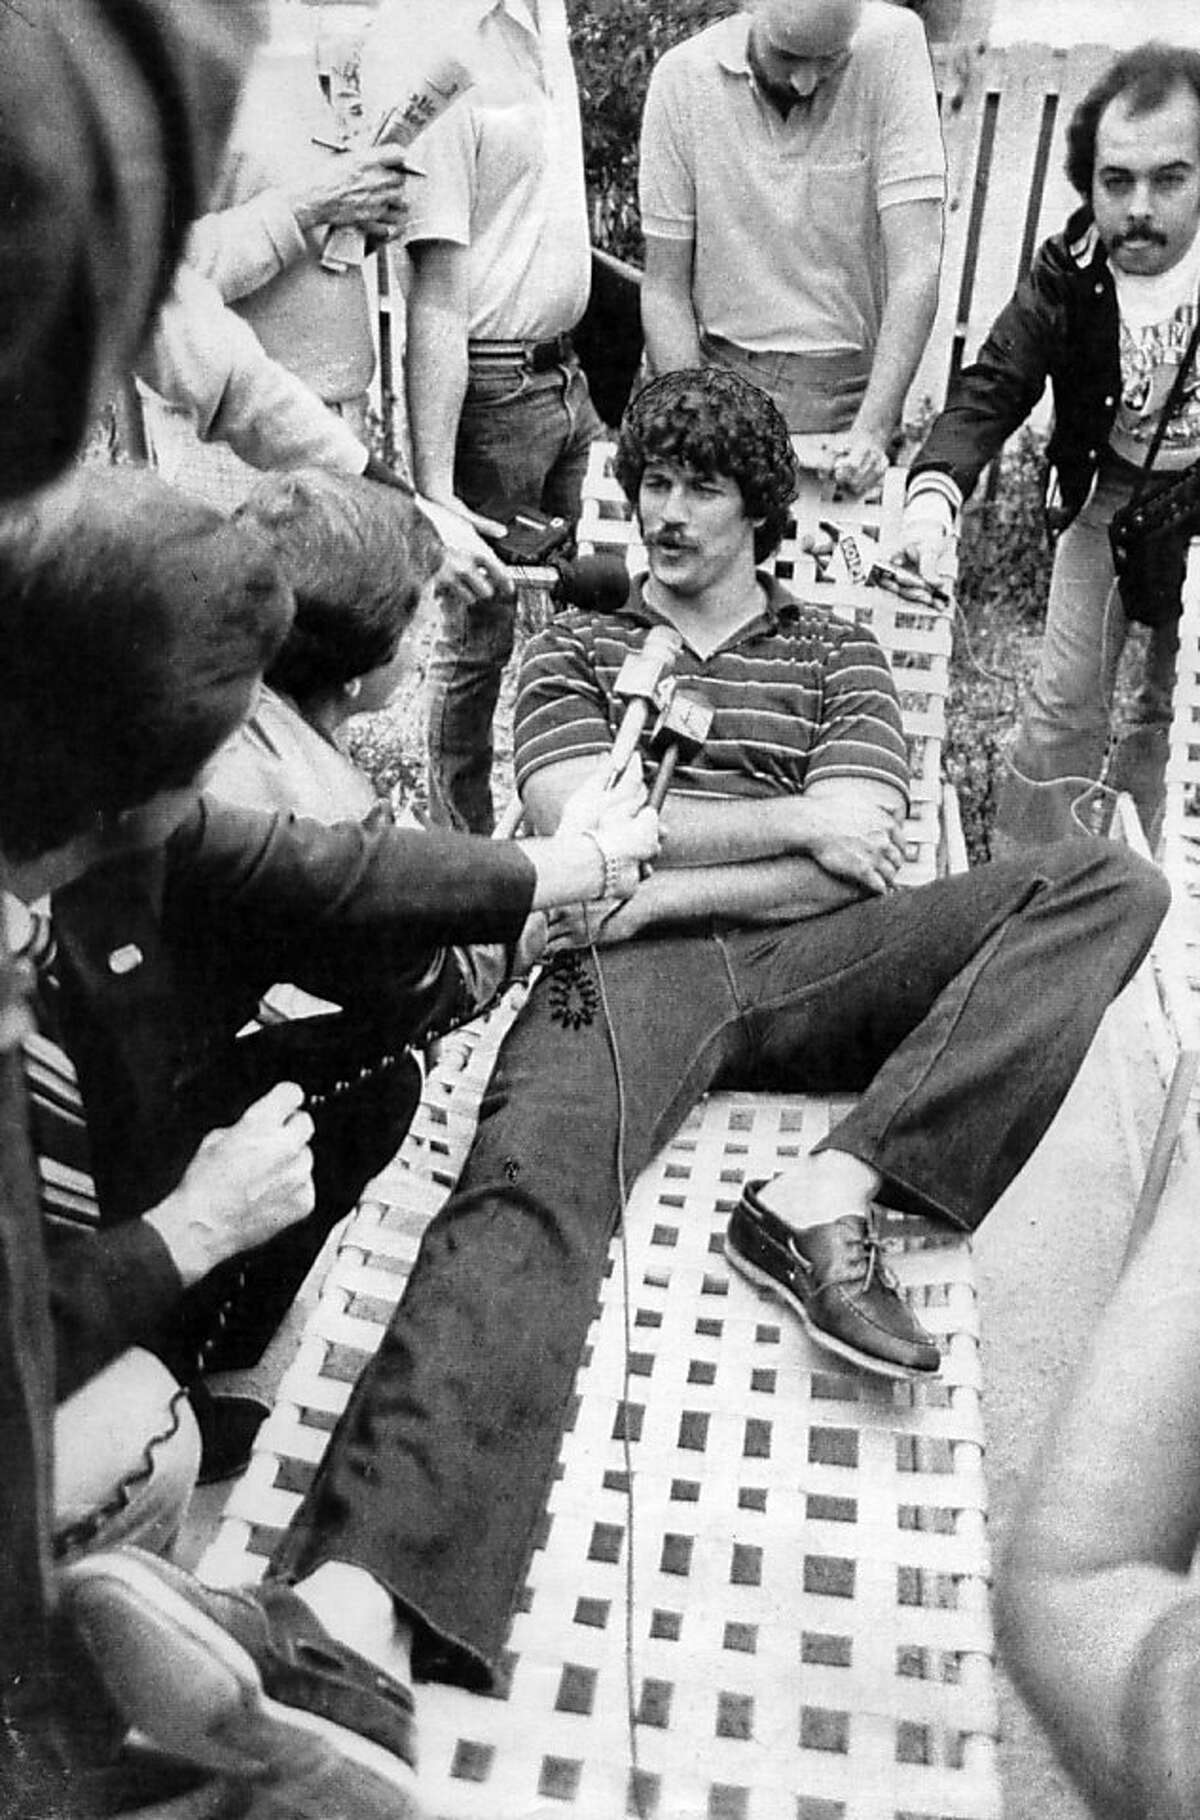 1/16/84 Tampa: Los Angles Raiders tight and Todd Christianon relaxes on a lounger at the team hotel surrounded by the media, Christianson caught twelve touchdown passes to lead the Raiders in TD receptions. Super BowlXVIII will pit the raiders against the NFC champion Washington Redskins. UPI